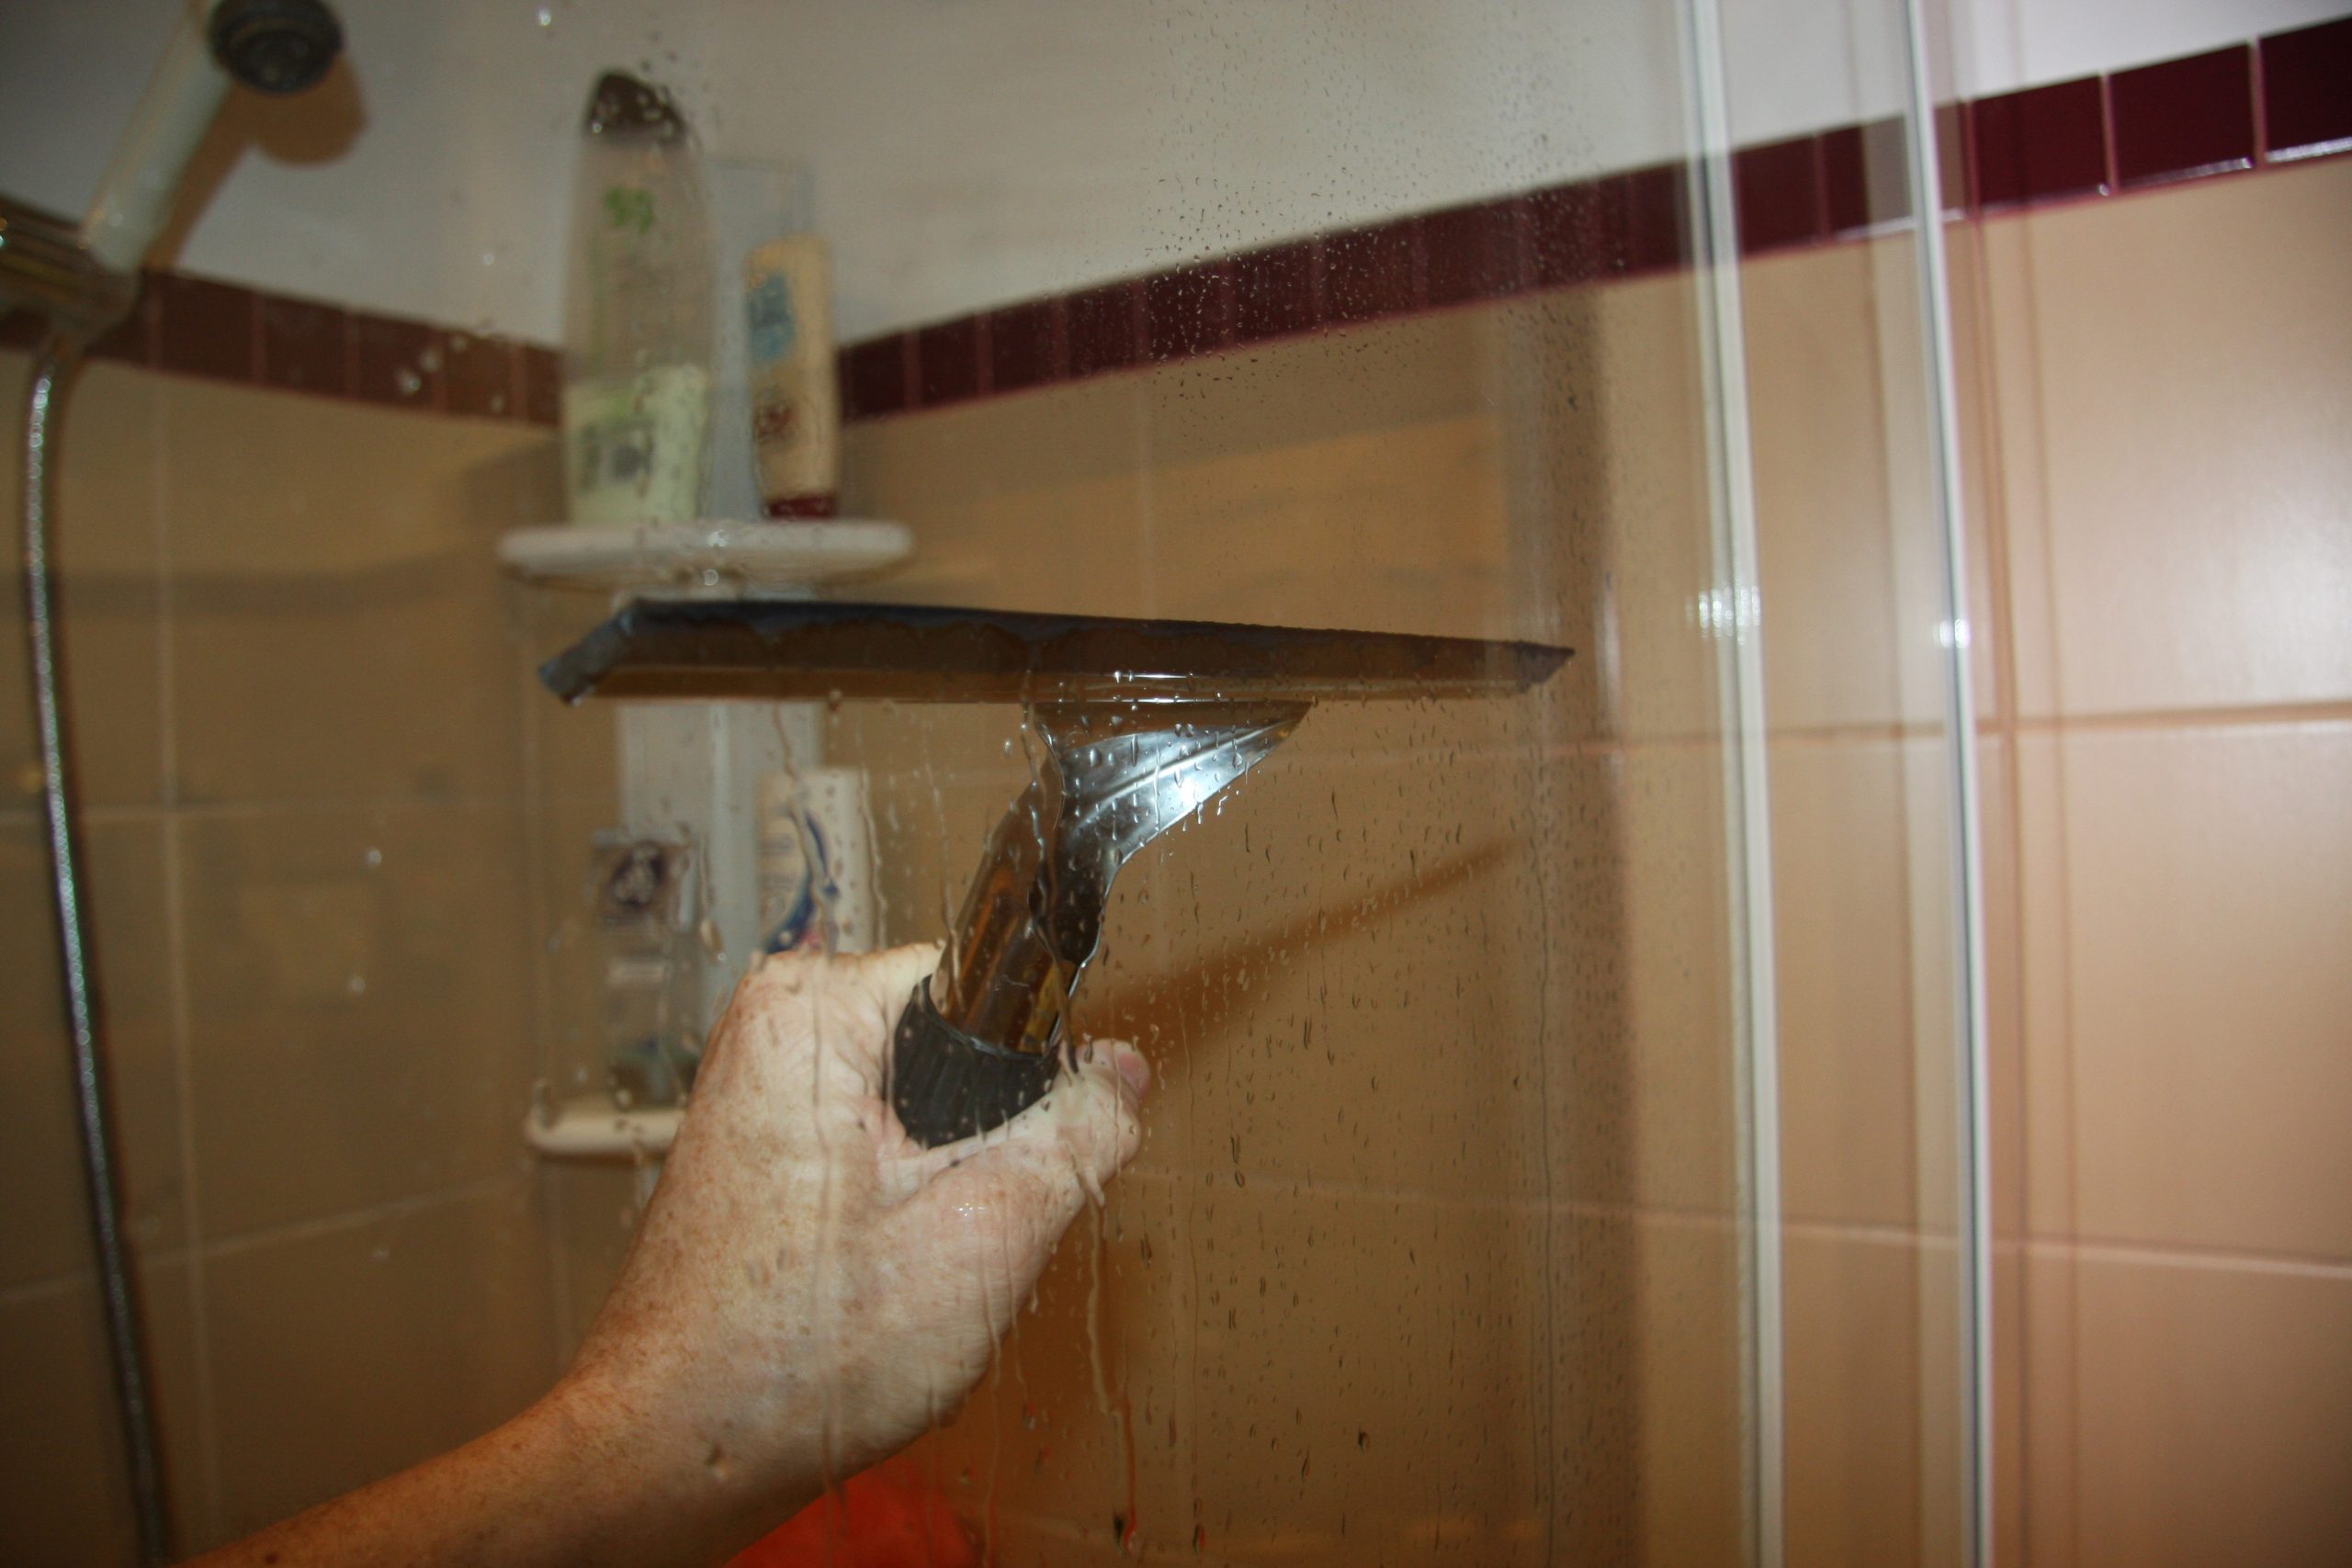 Squeegee for Cleaning Walls, Shower Stalls & Glass of Bathroom